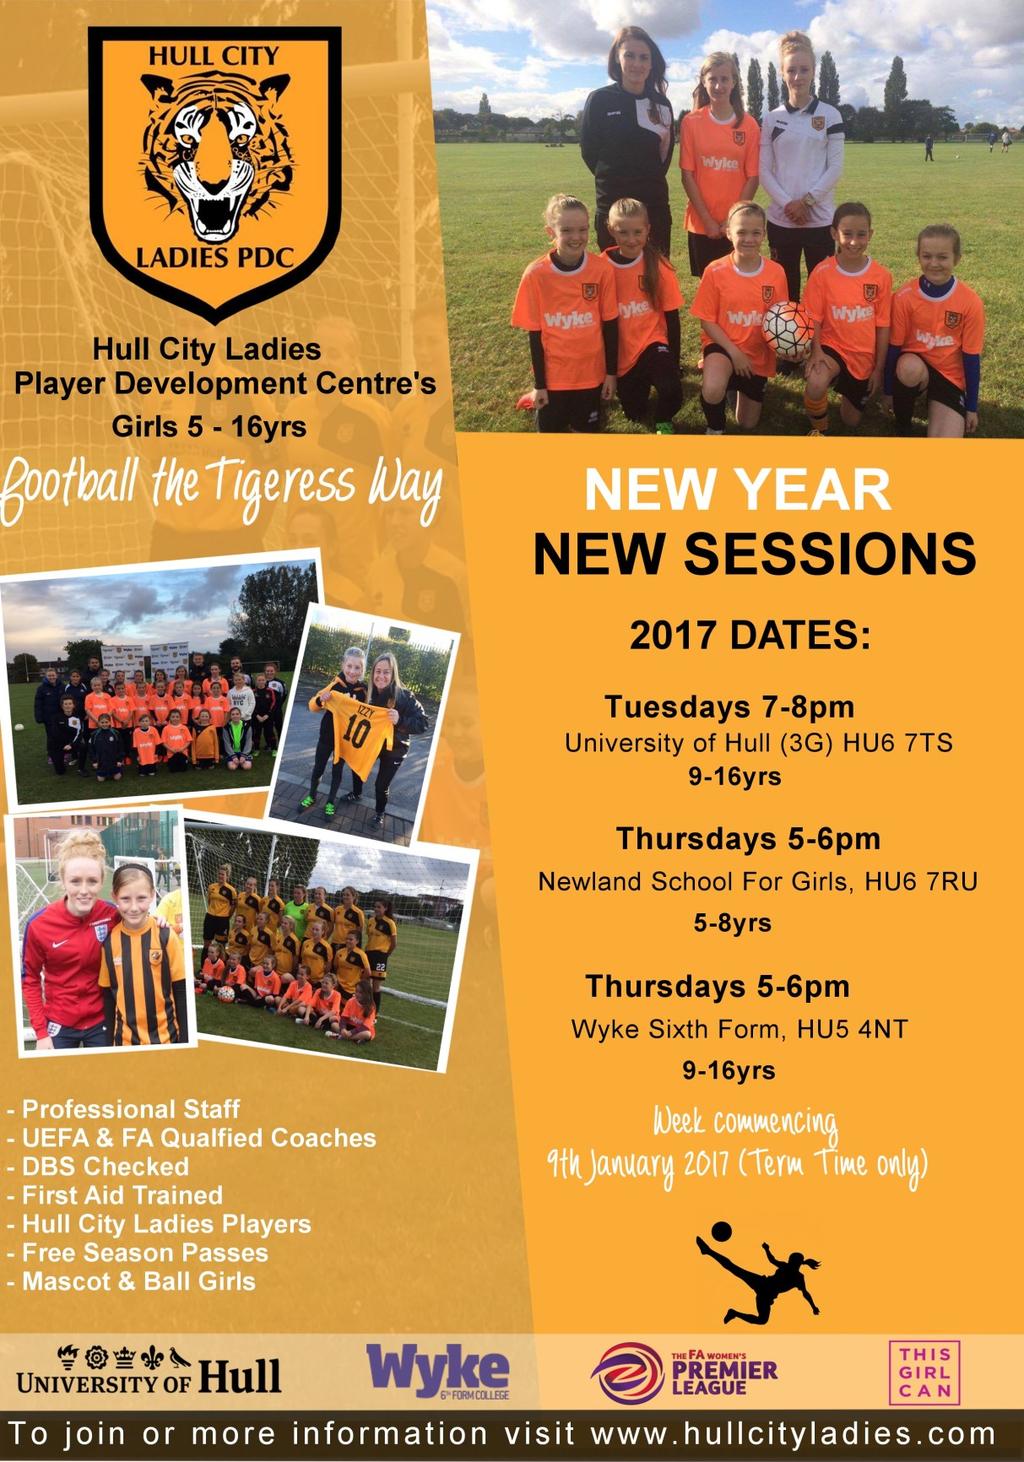 The Club are keen to build relationships with local coaches and invite coaches to come along and observe training sessions and learn from the